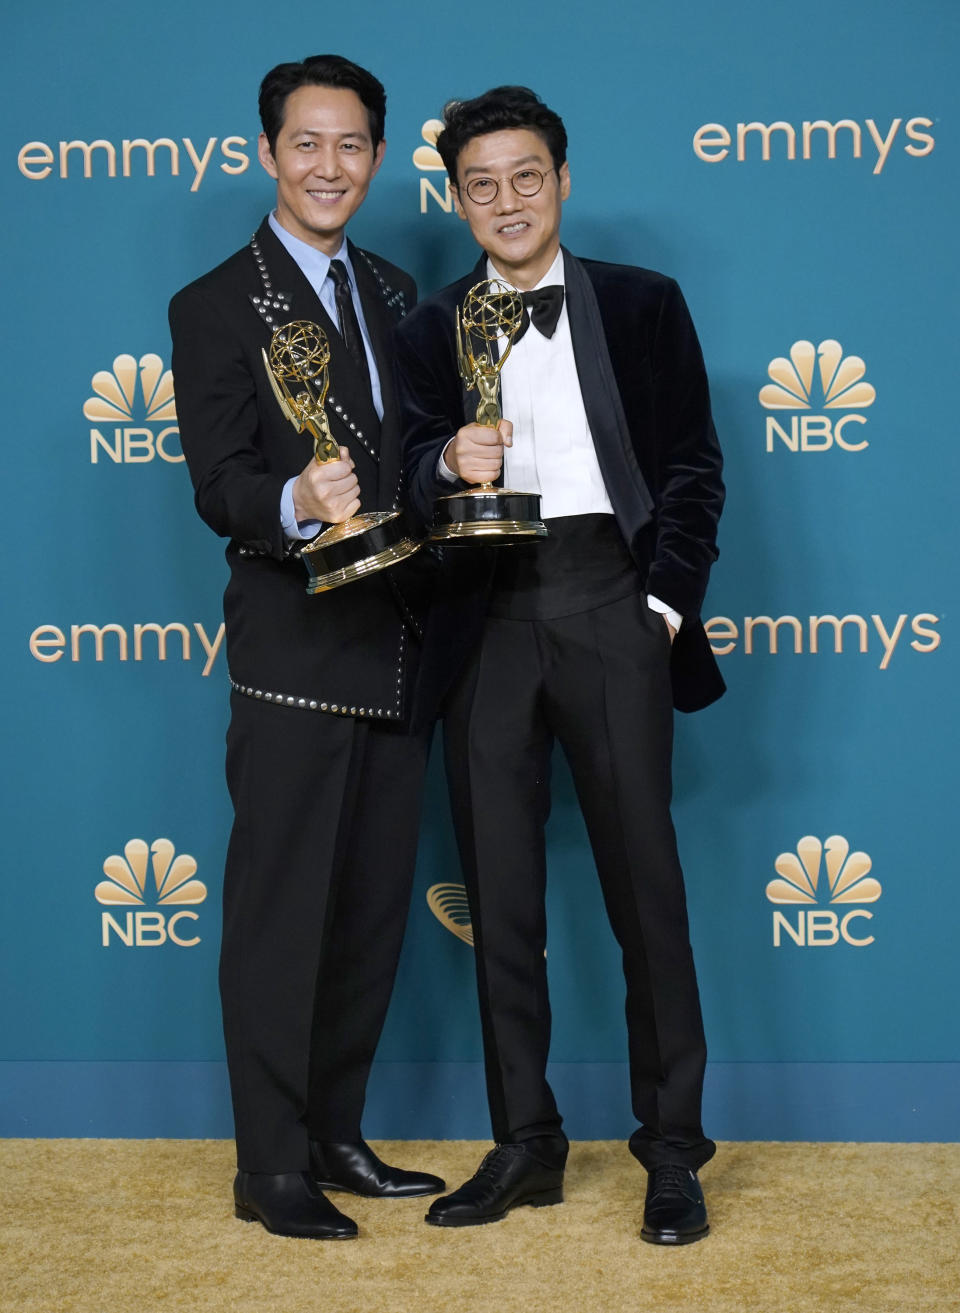 Lee Jung-jae, left, winner of the Emmy for outstanding lead actor in a drama series for "Squid Game", and Hwang Dong-hyuk, winner of the Emmy for outstanding directing for a drama series for "Squid Game", pose in the press room at the 74th Primetime Emmy Awards on Monday, Sept. 12, 2022, at the Microsoft Theater in Los Angeles. (AP Photo/Jae C. Hong)